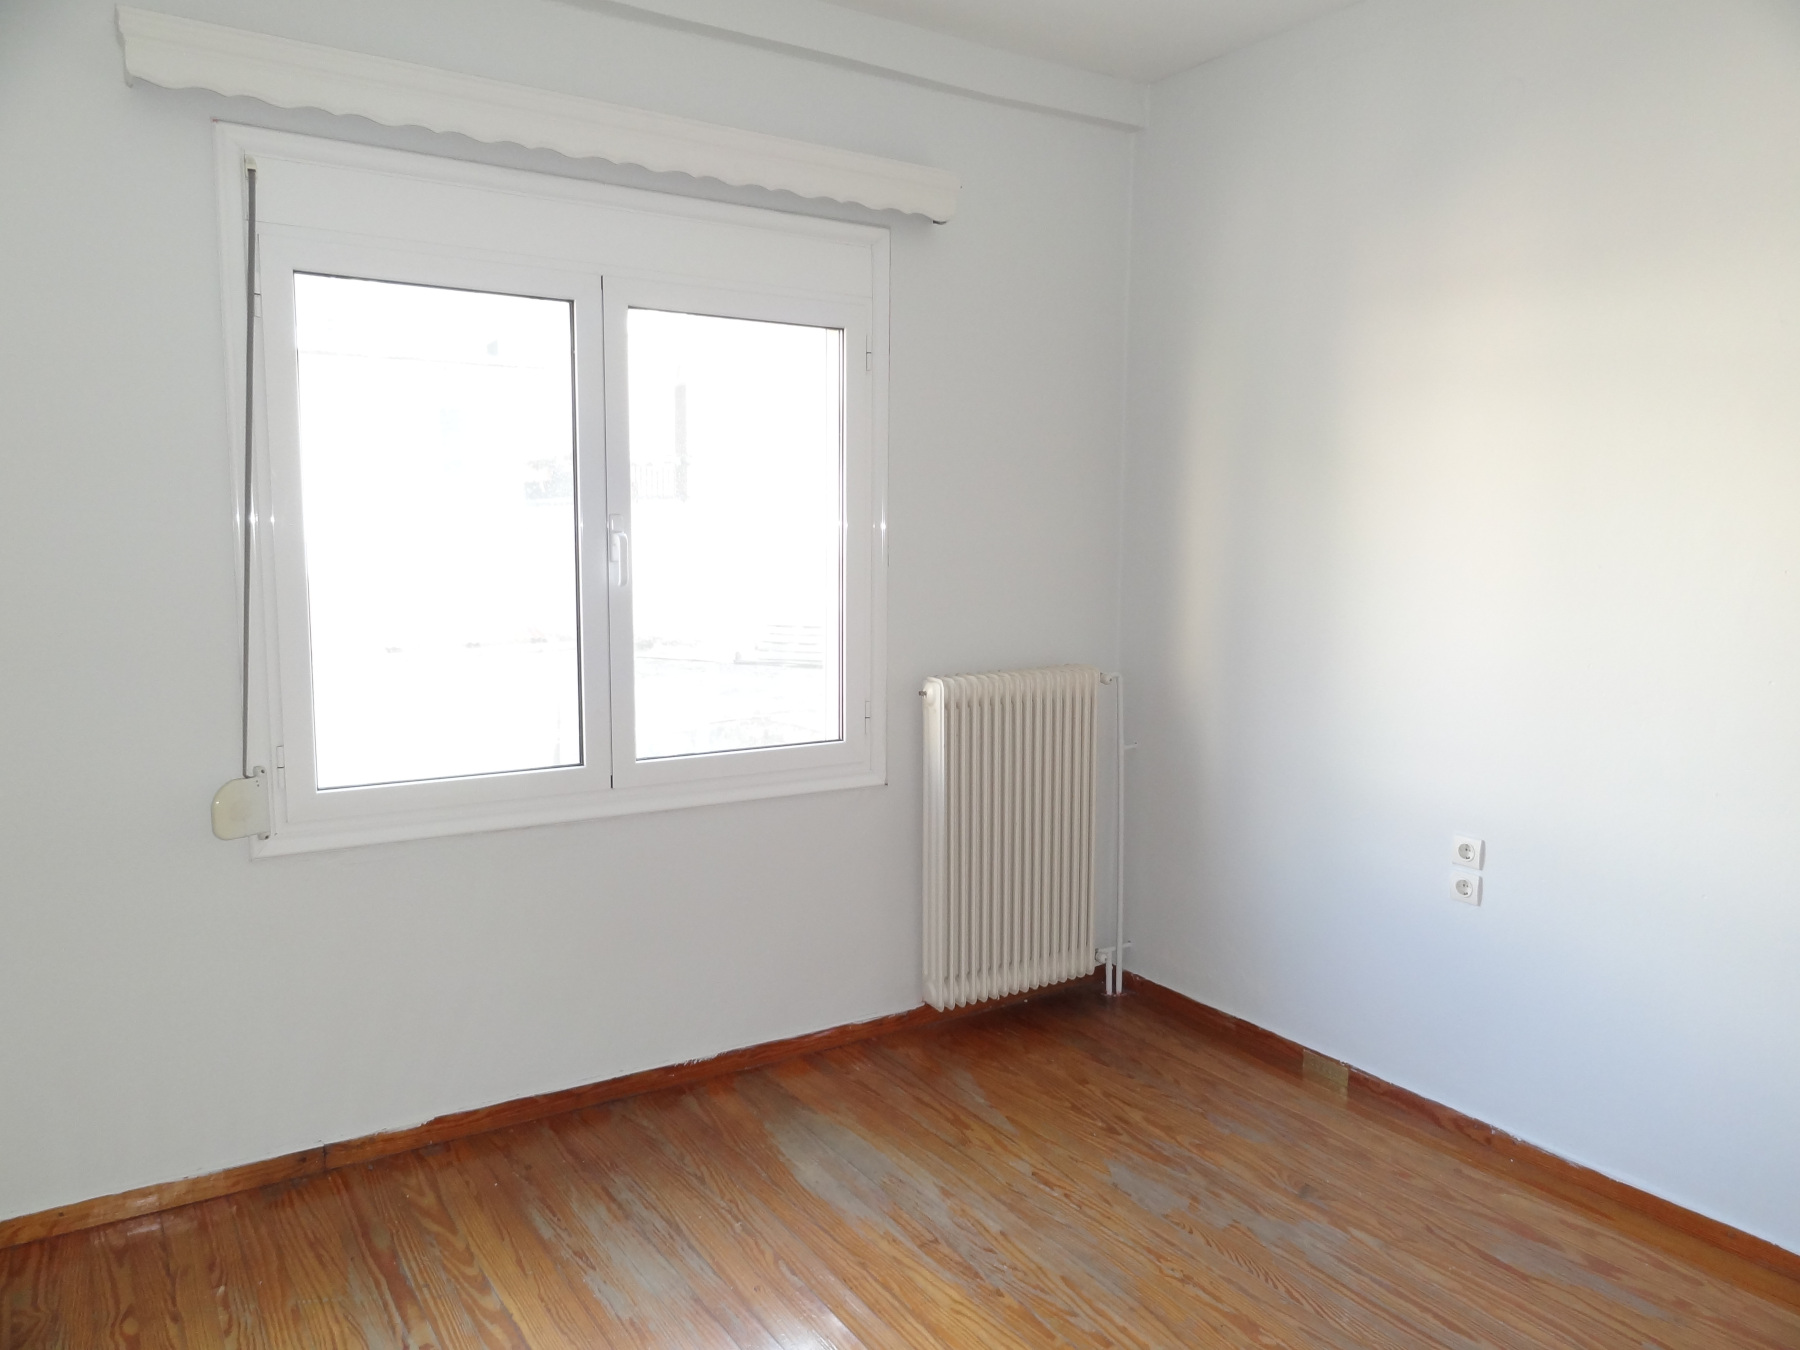 2-rooms apartment for rent, 42 sq.m. 1st floor for students near the Metropolis in Ioannina